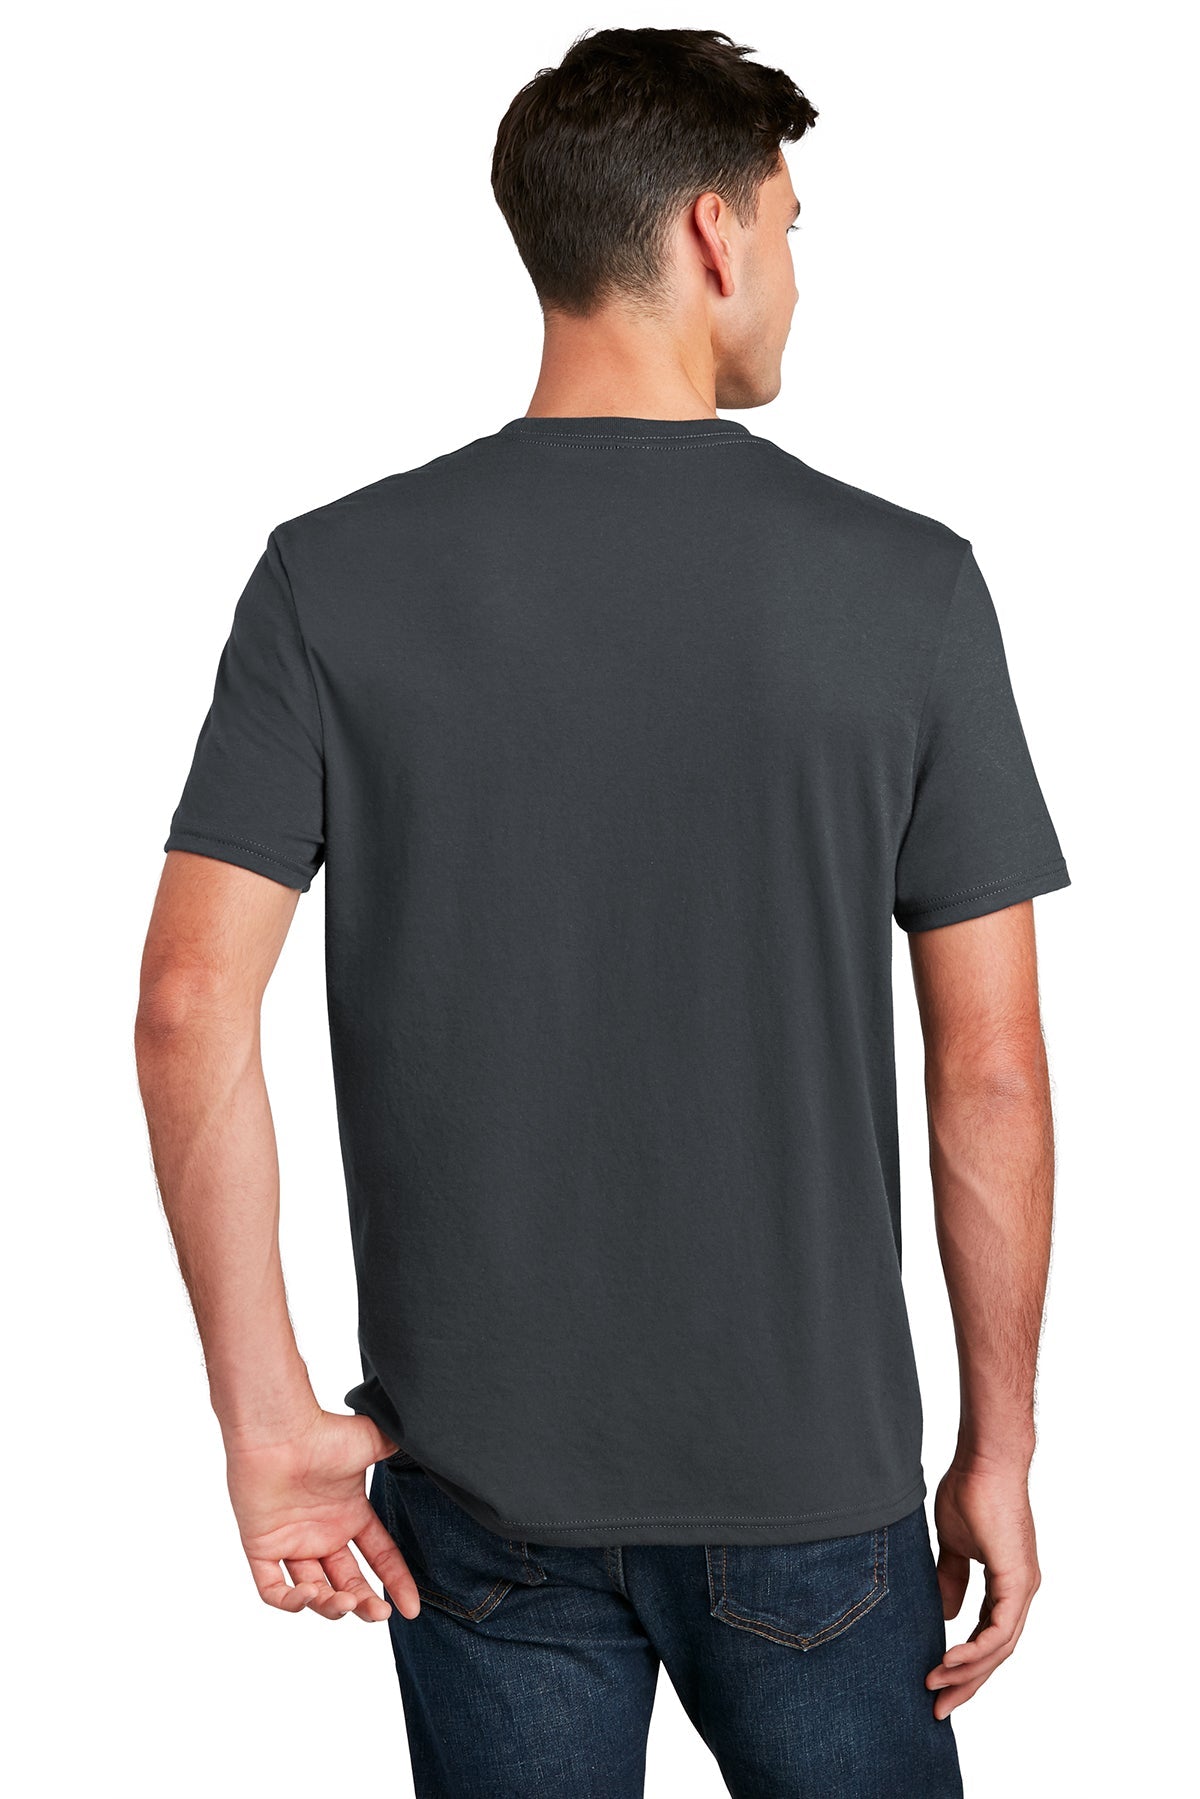 District Made Mens Perfect Blend Tee's, Charcoal